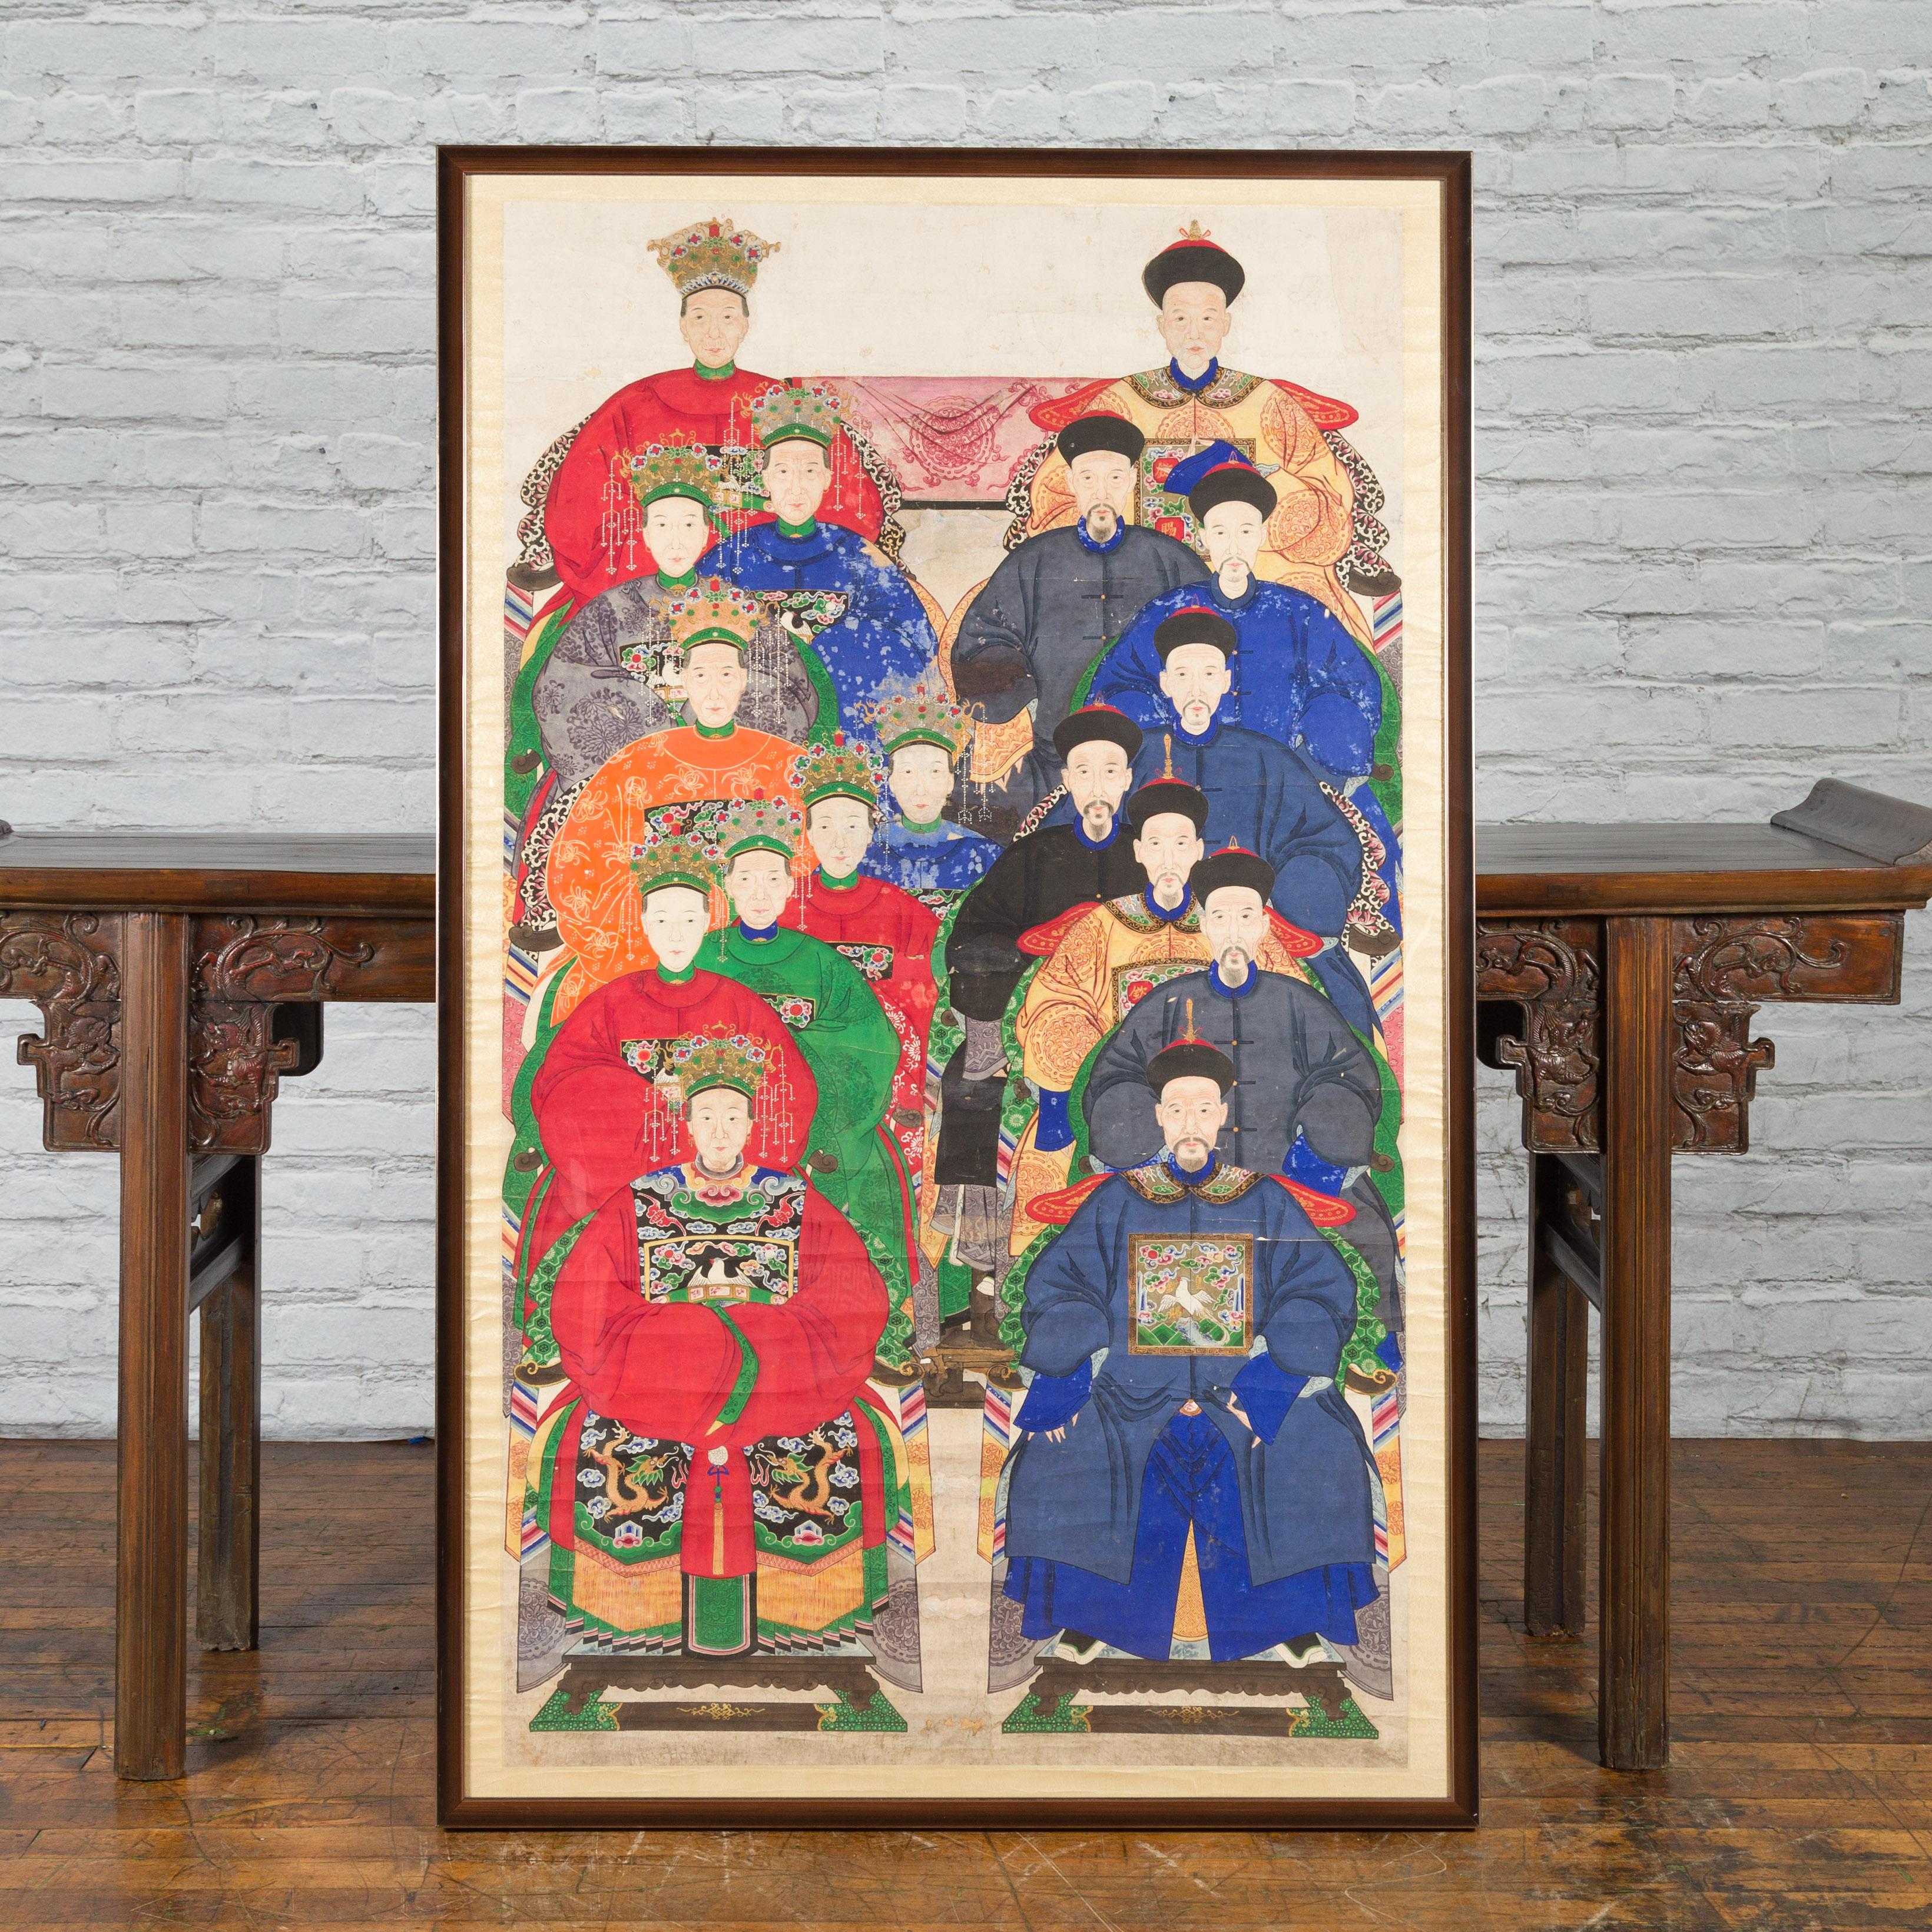 A Chinese Qing Dynasty period painting from the 19th century of an ancestor group portrait in custom frame. Created in China during the Qing Dynasty, this vertical painting features a group portrait of ancestors including civil officials